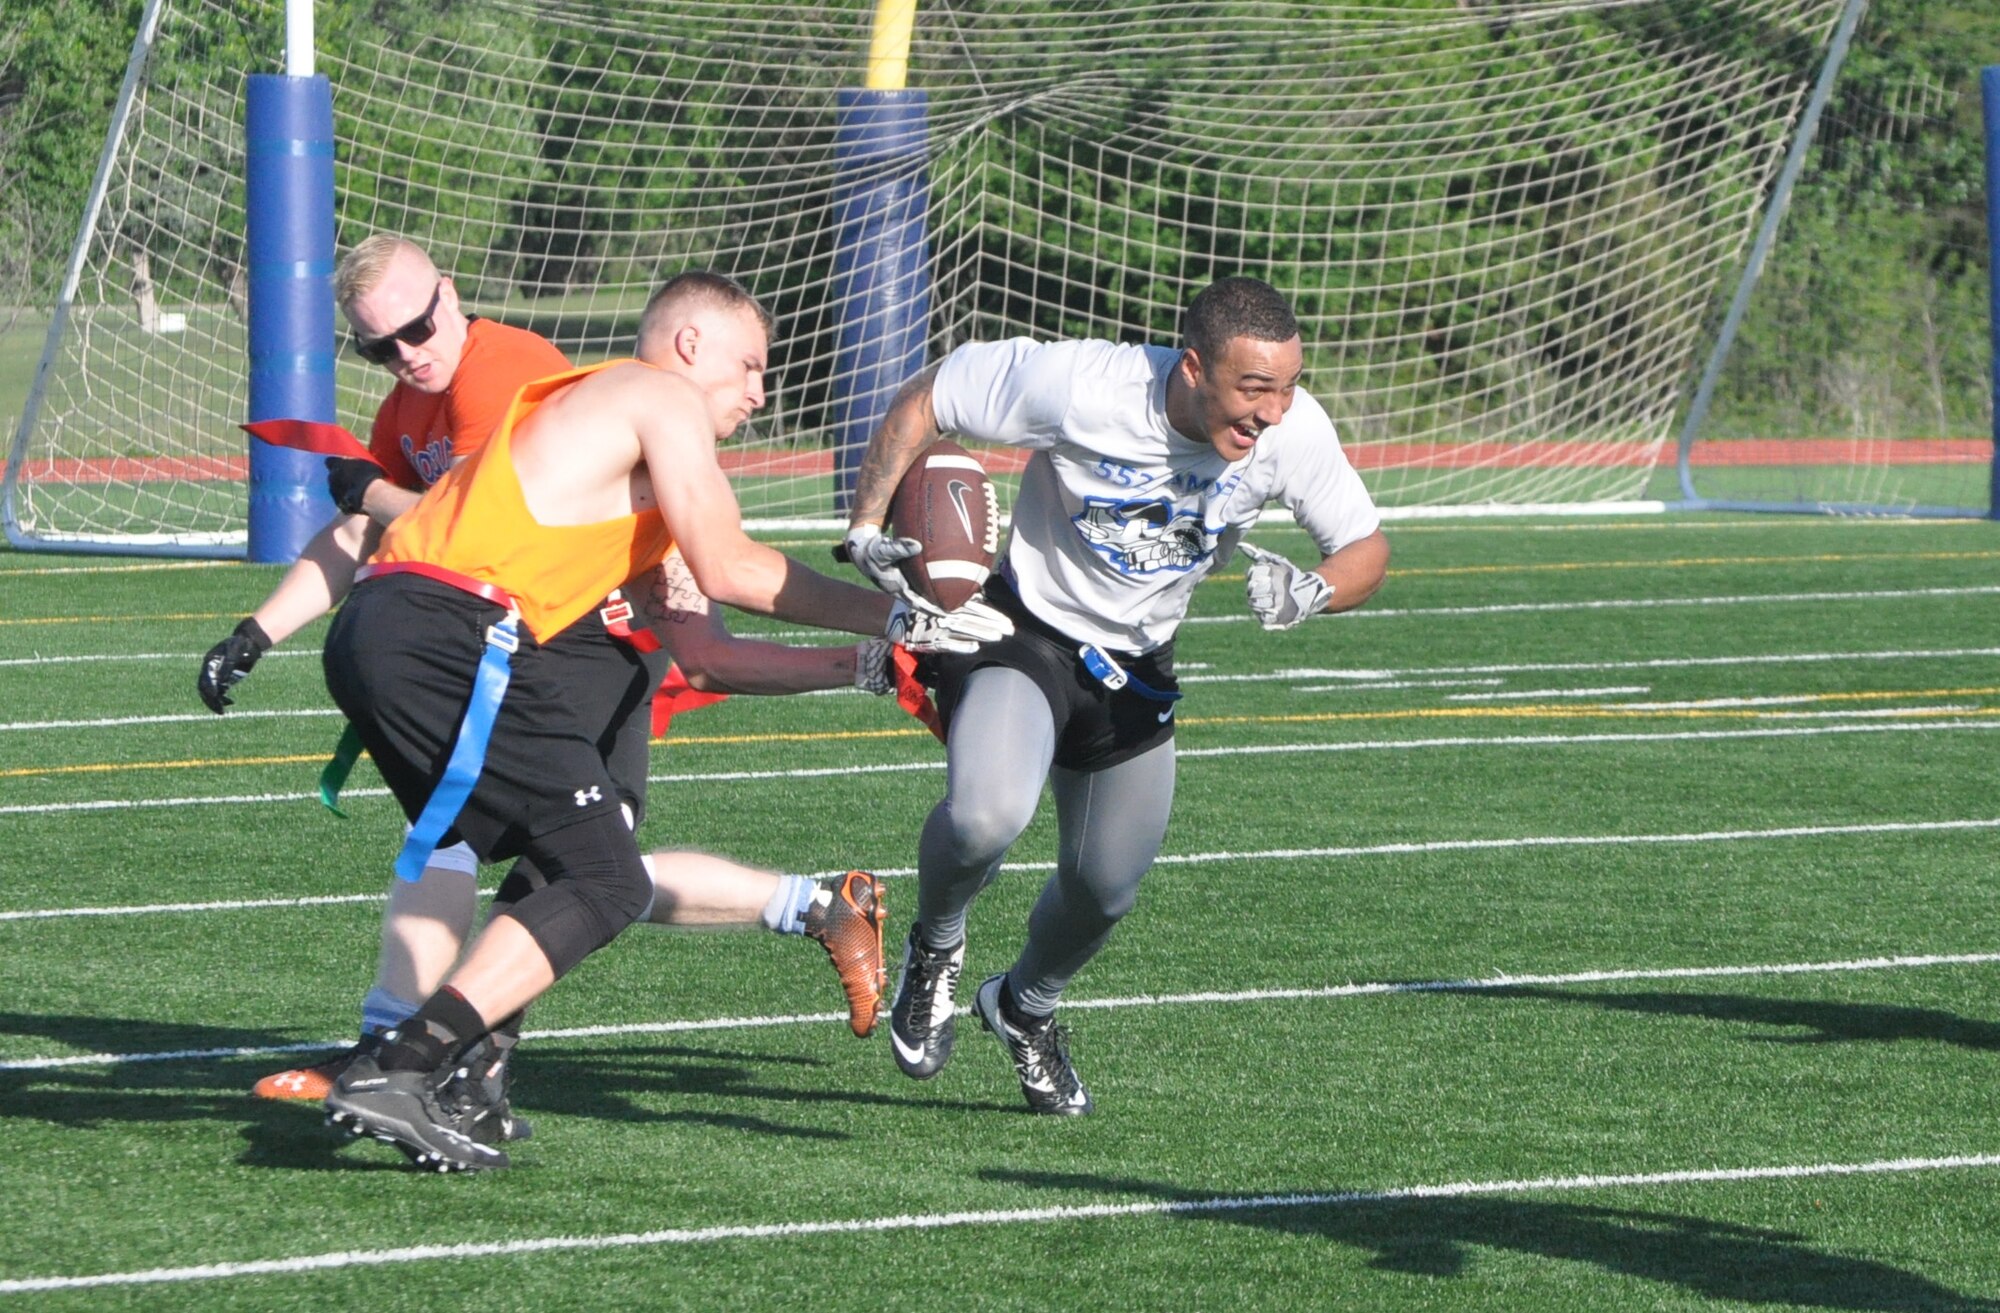 552nd AMXS player Michael is raring to run April 18 after he caught a short pass from quarterback Marc. AMXS defeated 552nd MXS 14-0 in intramural football. AMXS’ record bumped up to 4-1 with the win, placing it one game behind undefeated Reserve Gold as of that date. (Air Force photo by John Parker)